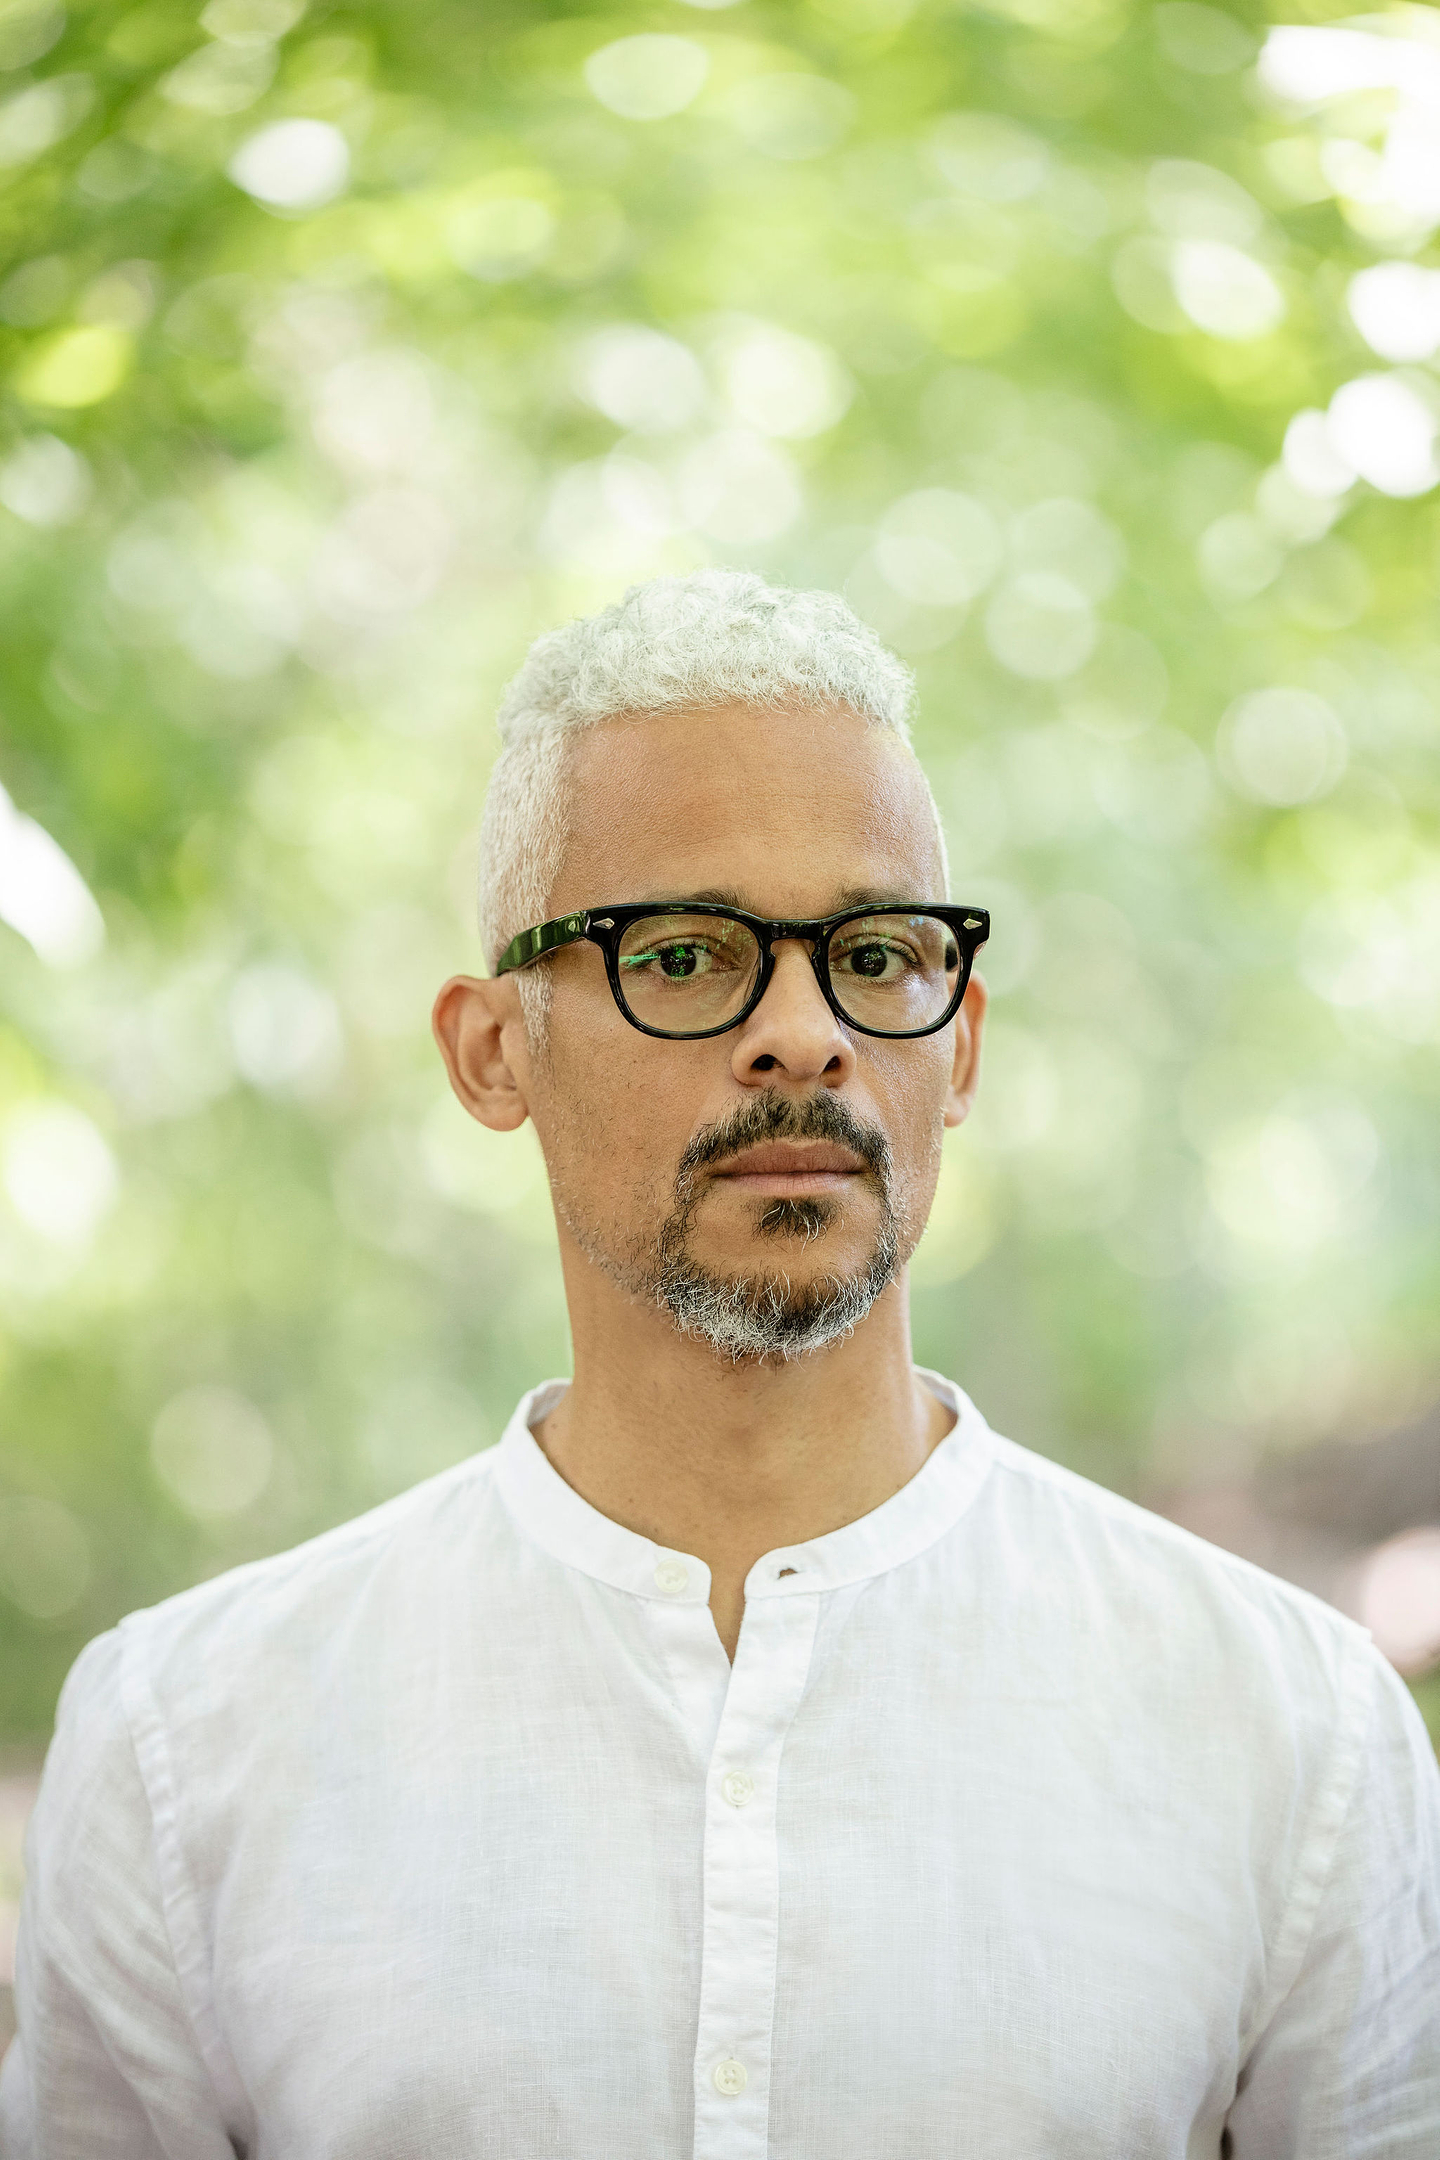 Kaie Kellough holds a soft expression while gazing into the camera. He has short silver hair, and wears black framed glasses and a white mandarin collar shirt with the top button undone. He stands outdoors with blurred green foliage and dappled light in the background.